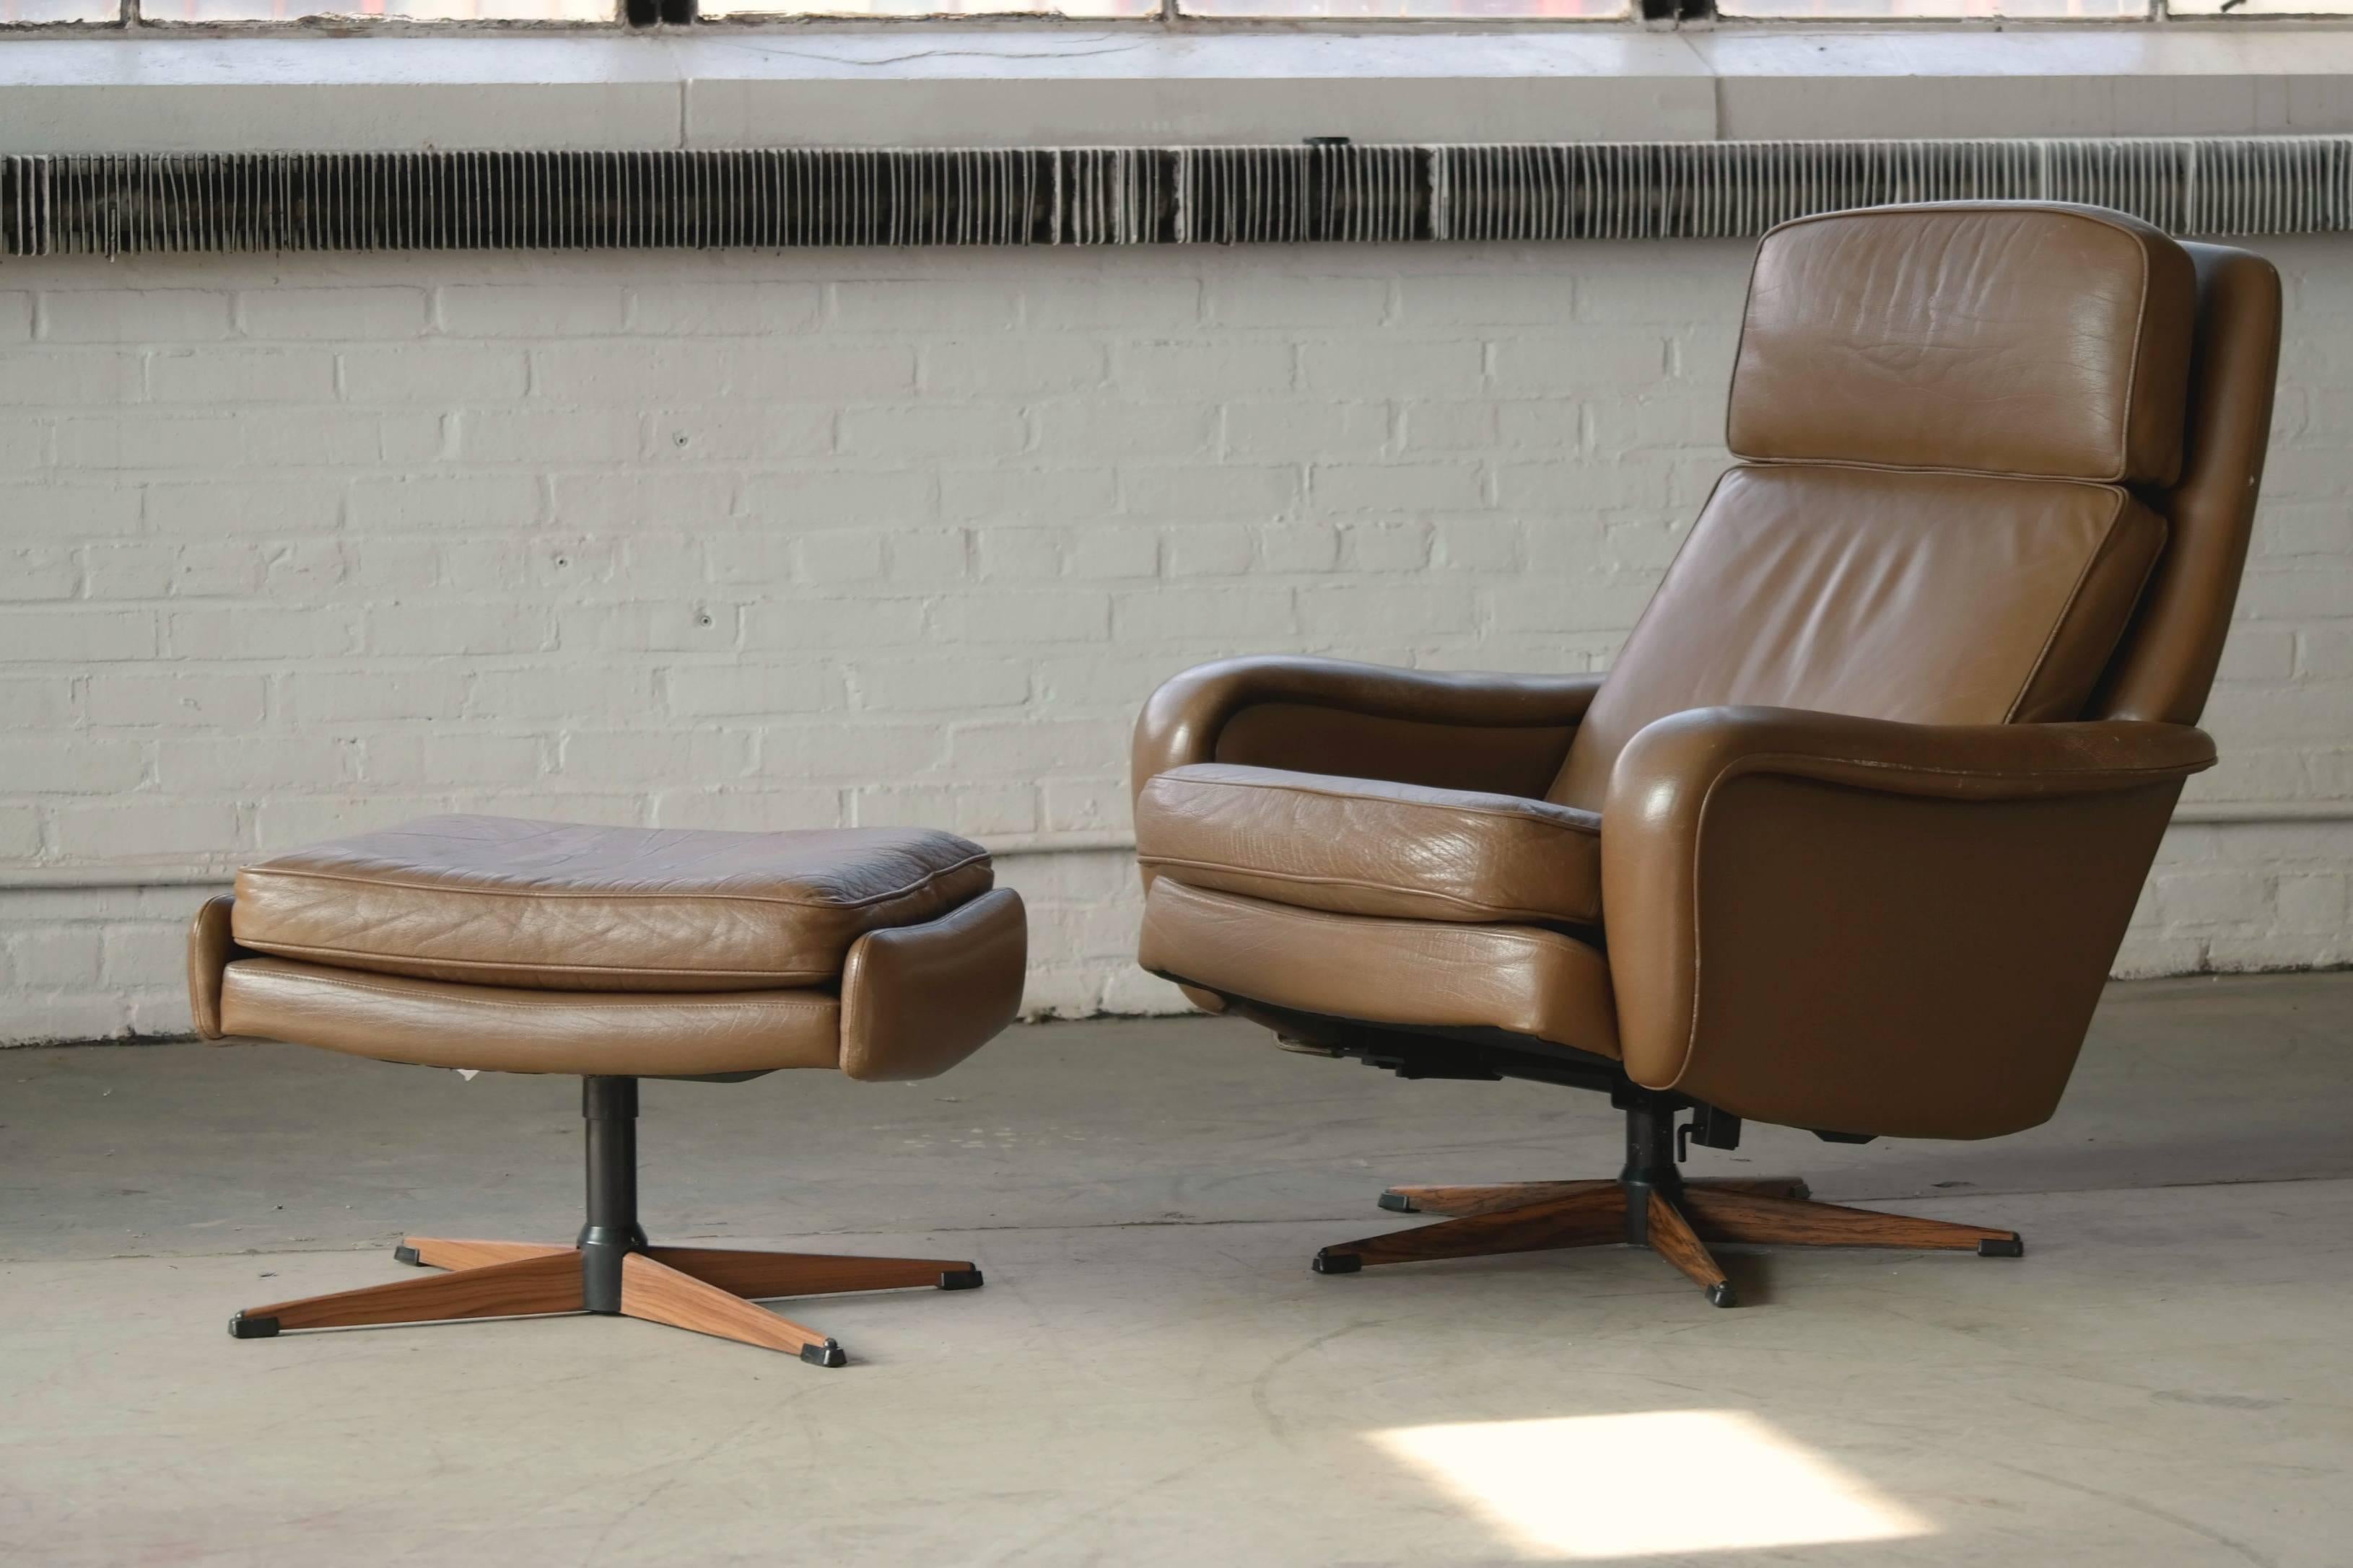 Superb Danish Mid-Century leather swivel lounge chair with ottoman by
Madsen & Schubel. The same high quality that so typical for this maker. The bases are made of steel with imitation wood accents.